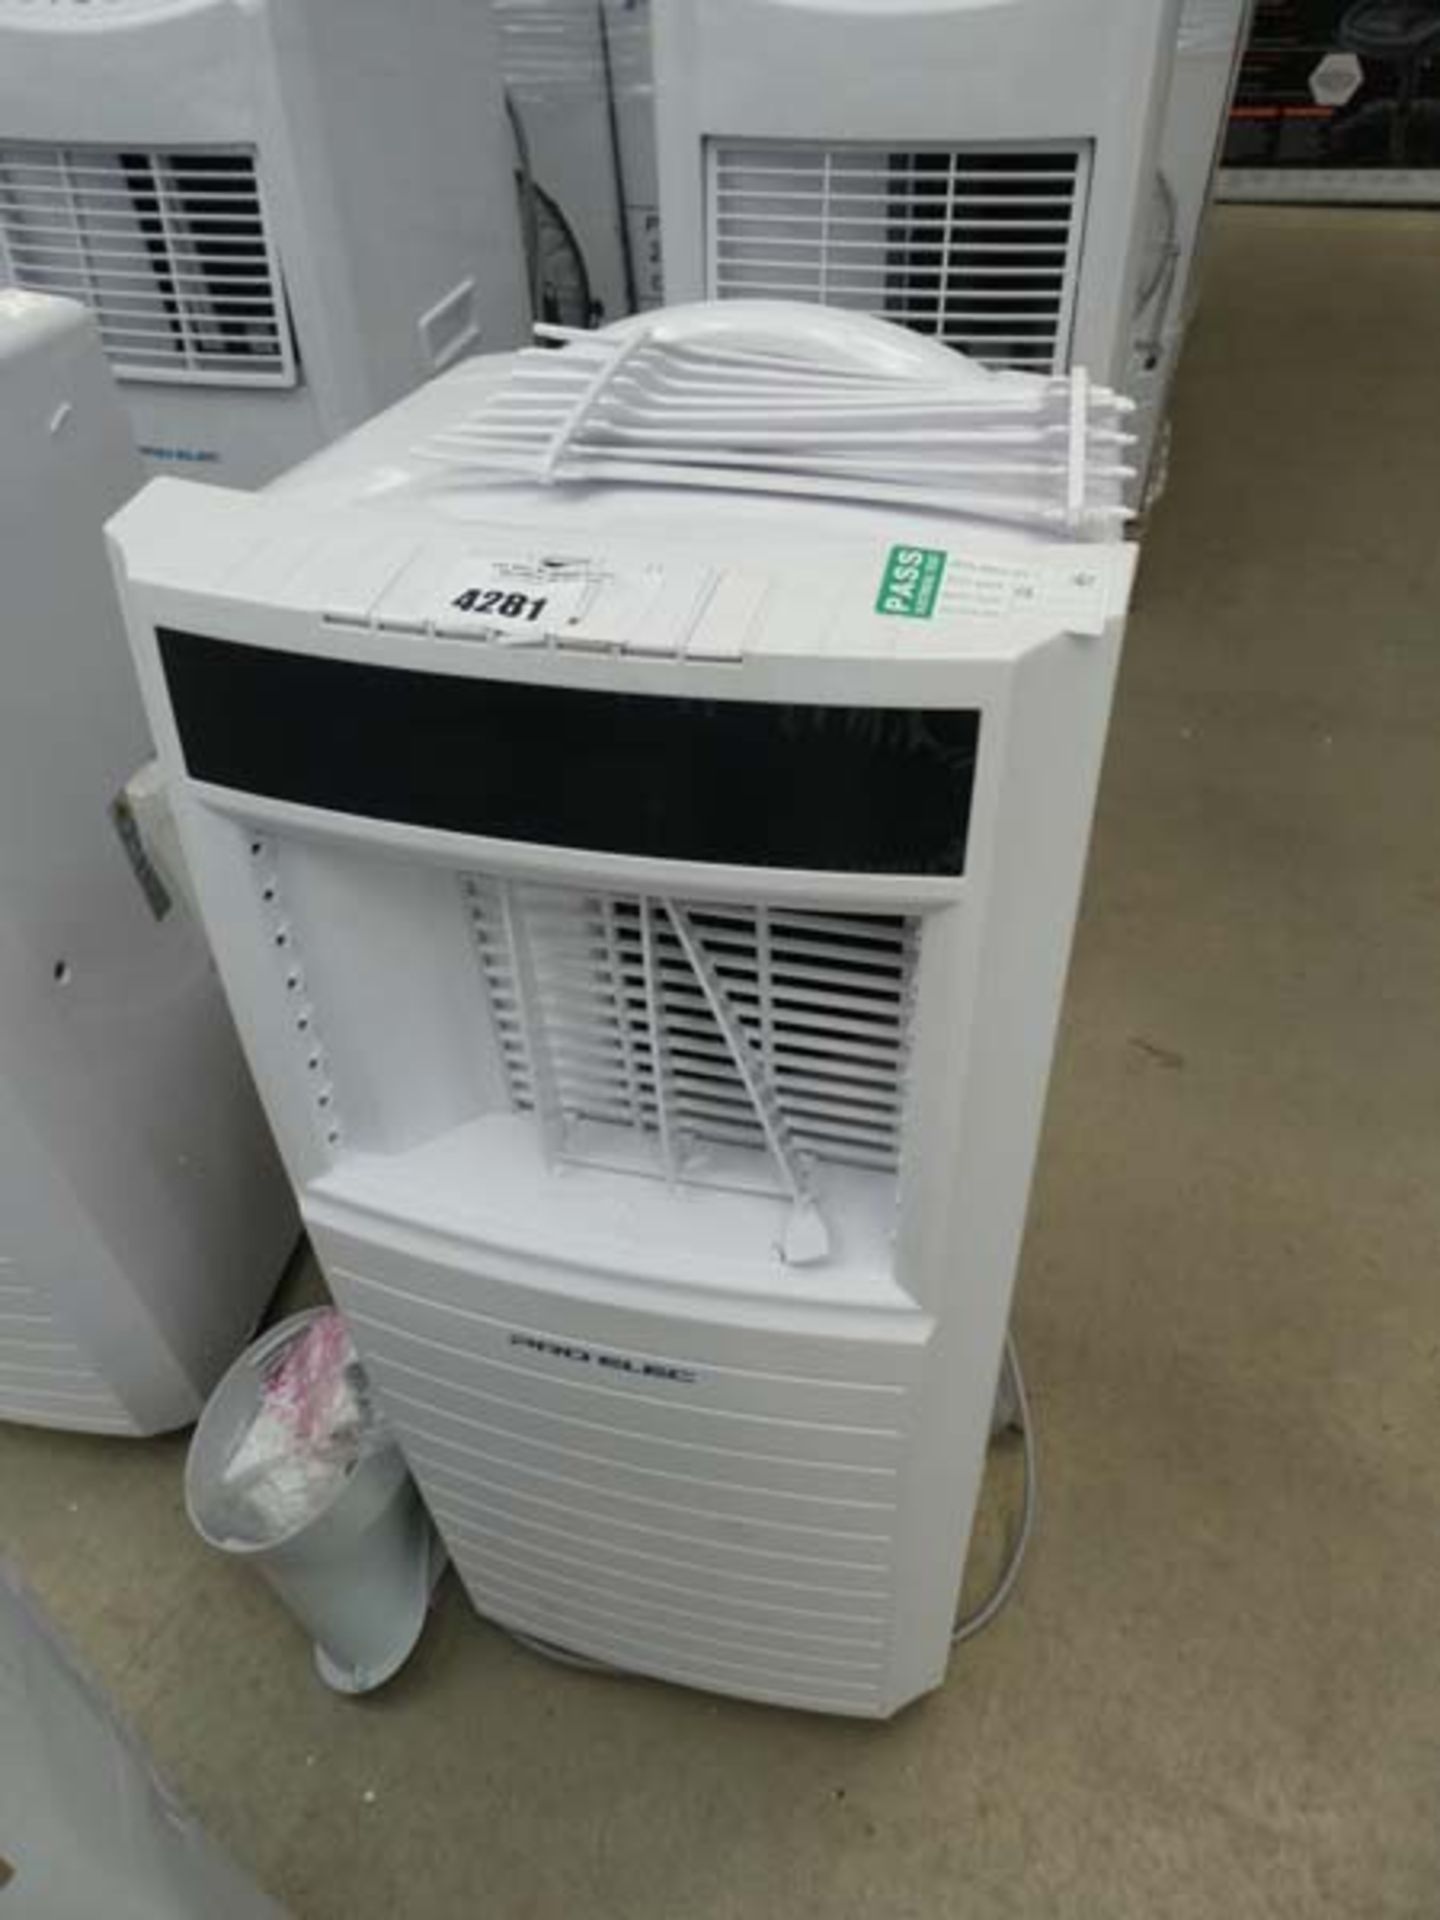 Pro Elec air conditioning unit with hose